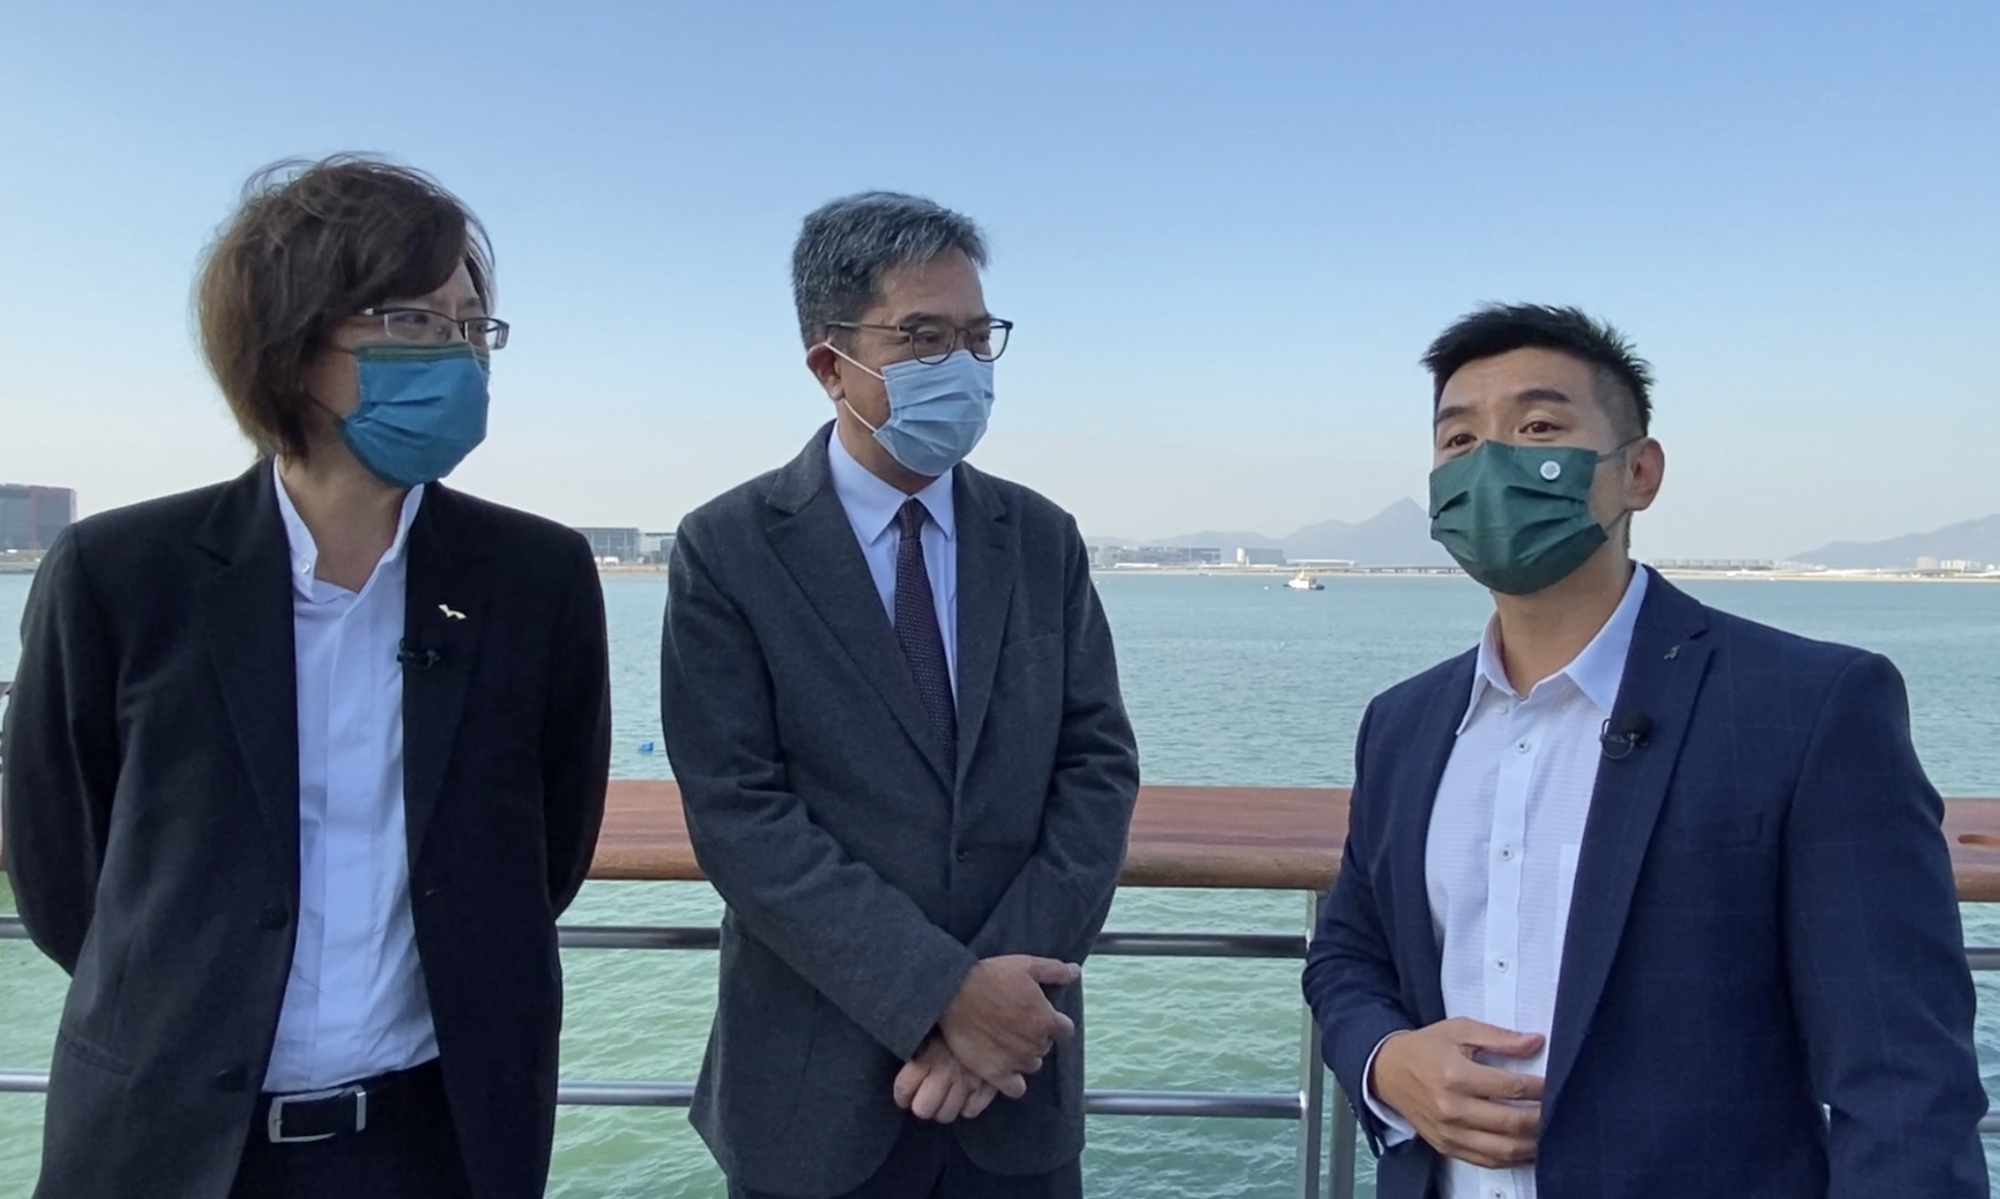 The SDEV, Mr Michael WONG (centre), is briefed by Senior Engineer of the SLO of the CEDD, Mr YUNG Sai-man, Gary (right), on the progress of the Tung Chung East Promenade improvement works.